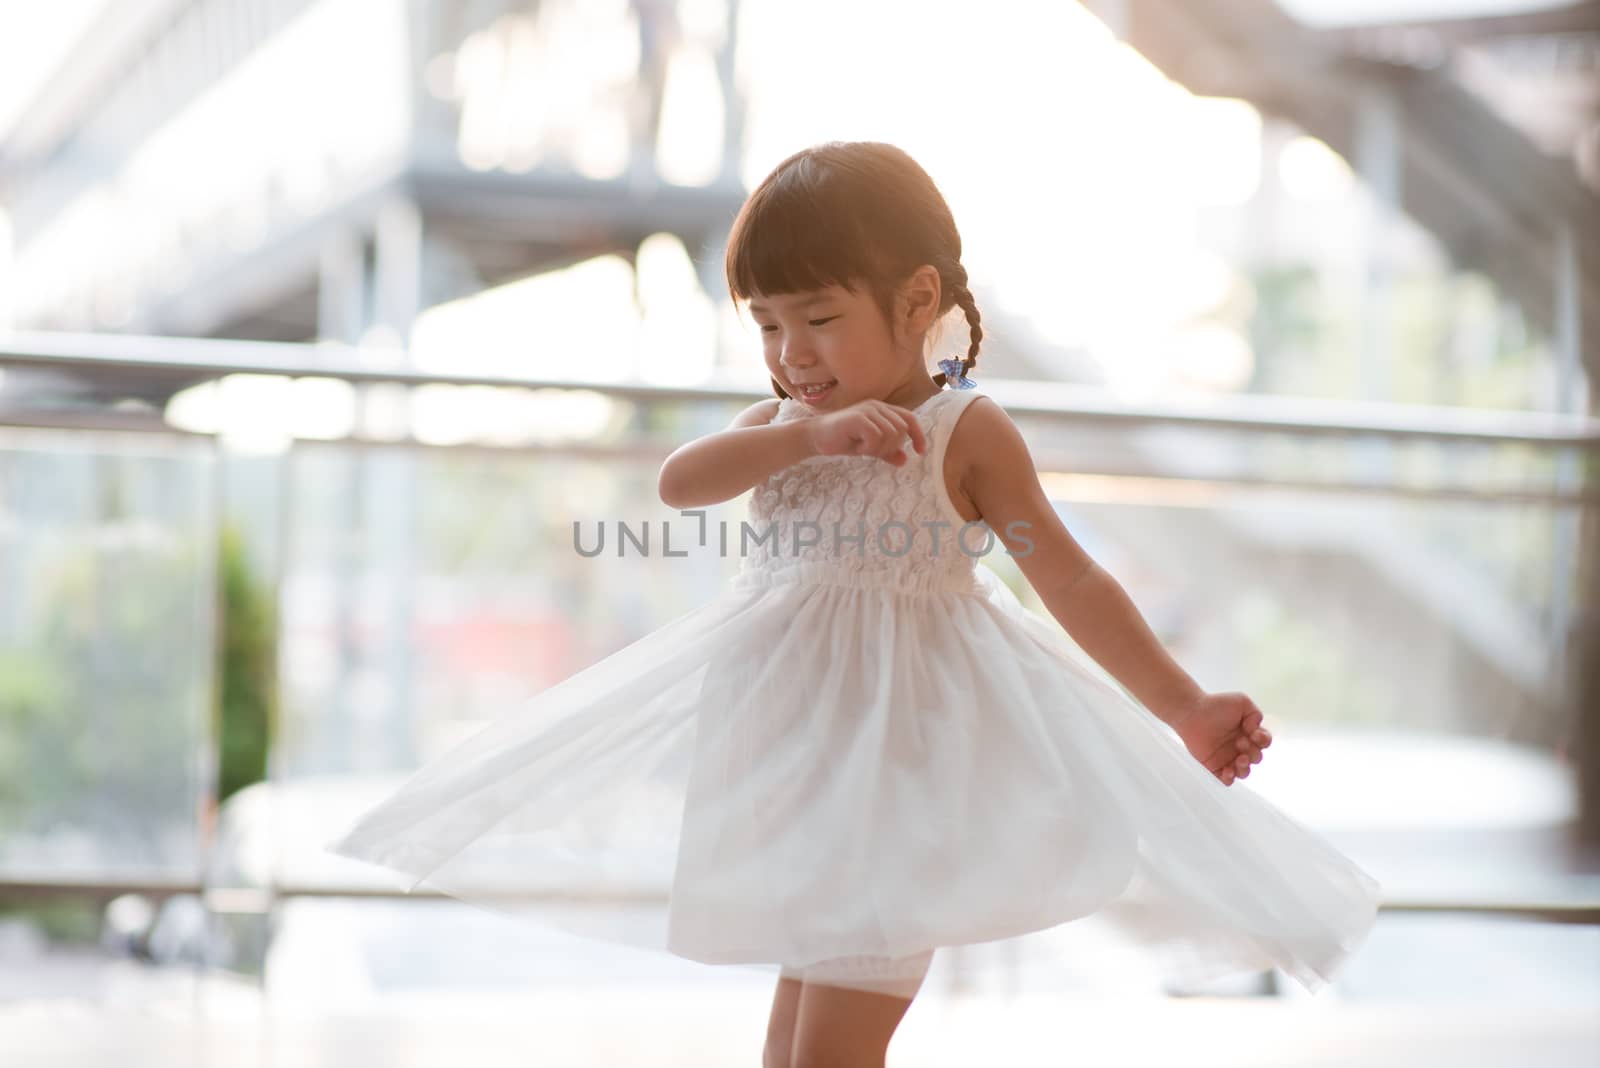 Happy adorable little girl in white dress dancing. Asian family outdoor lifestyle with natural light.